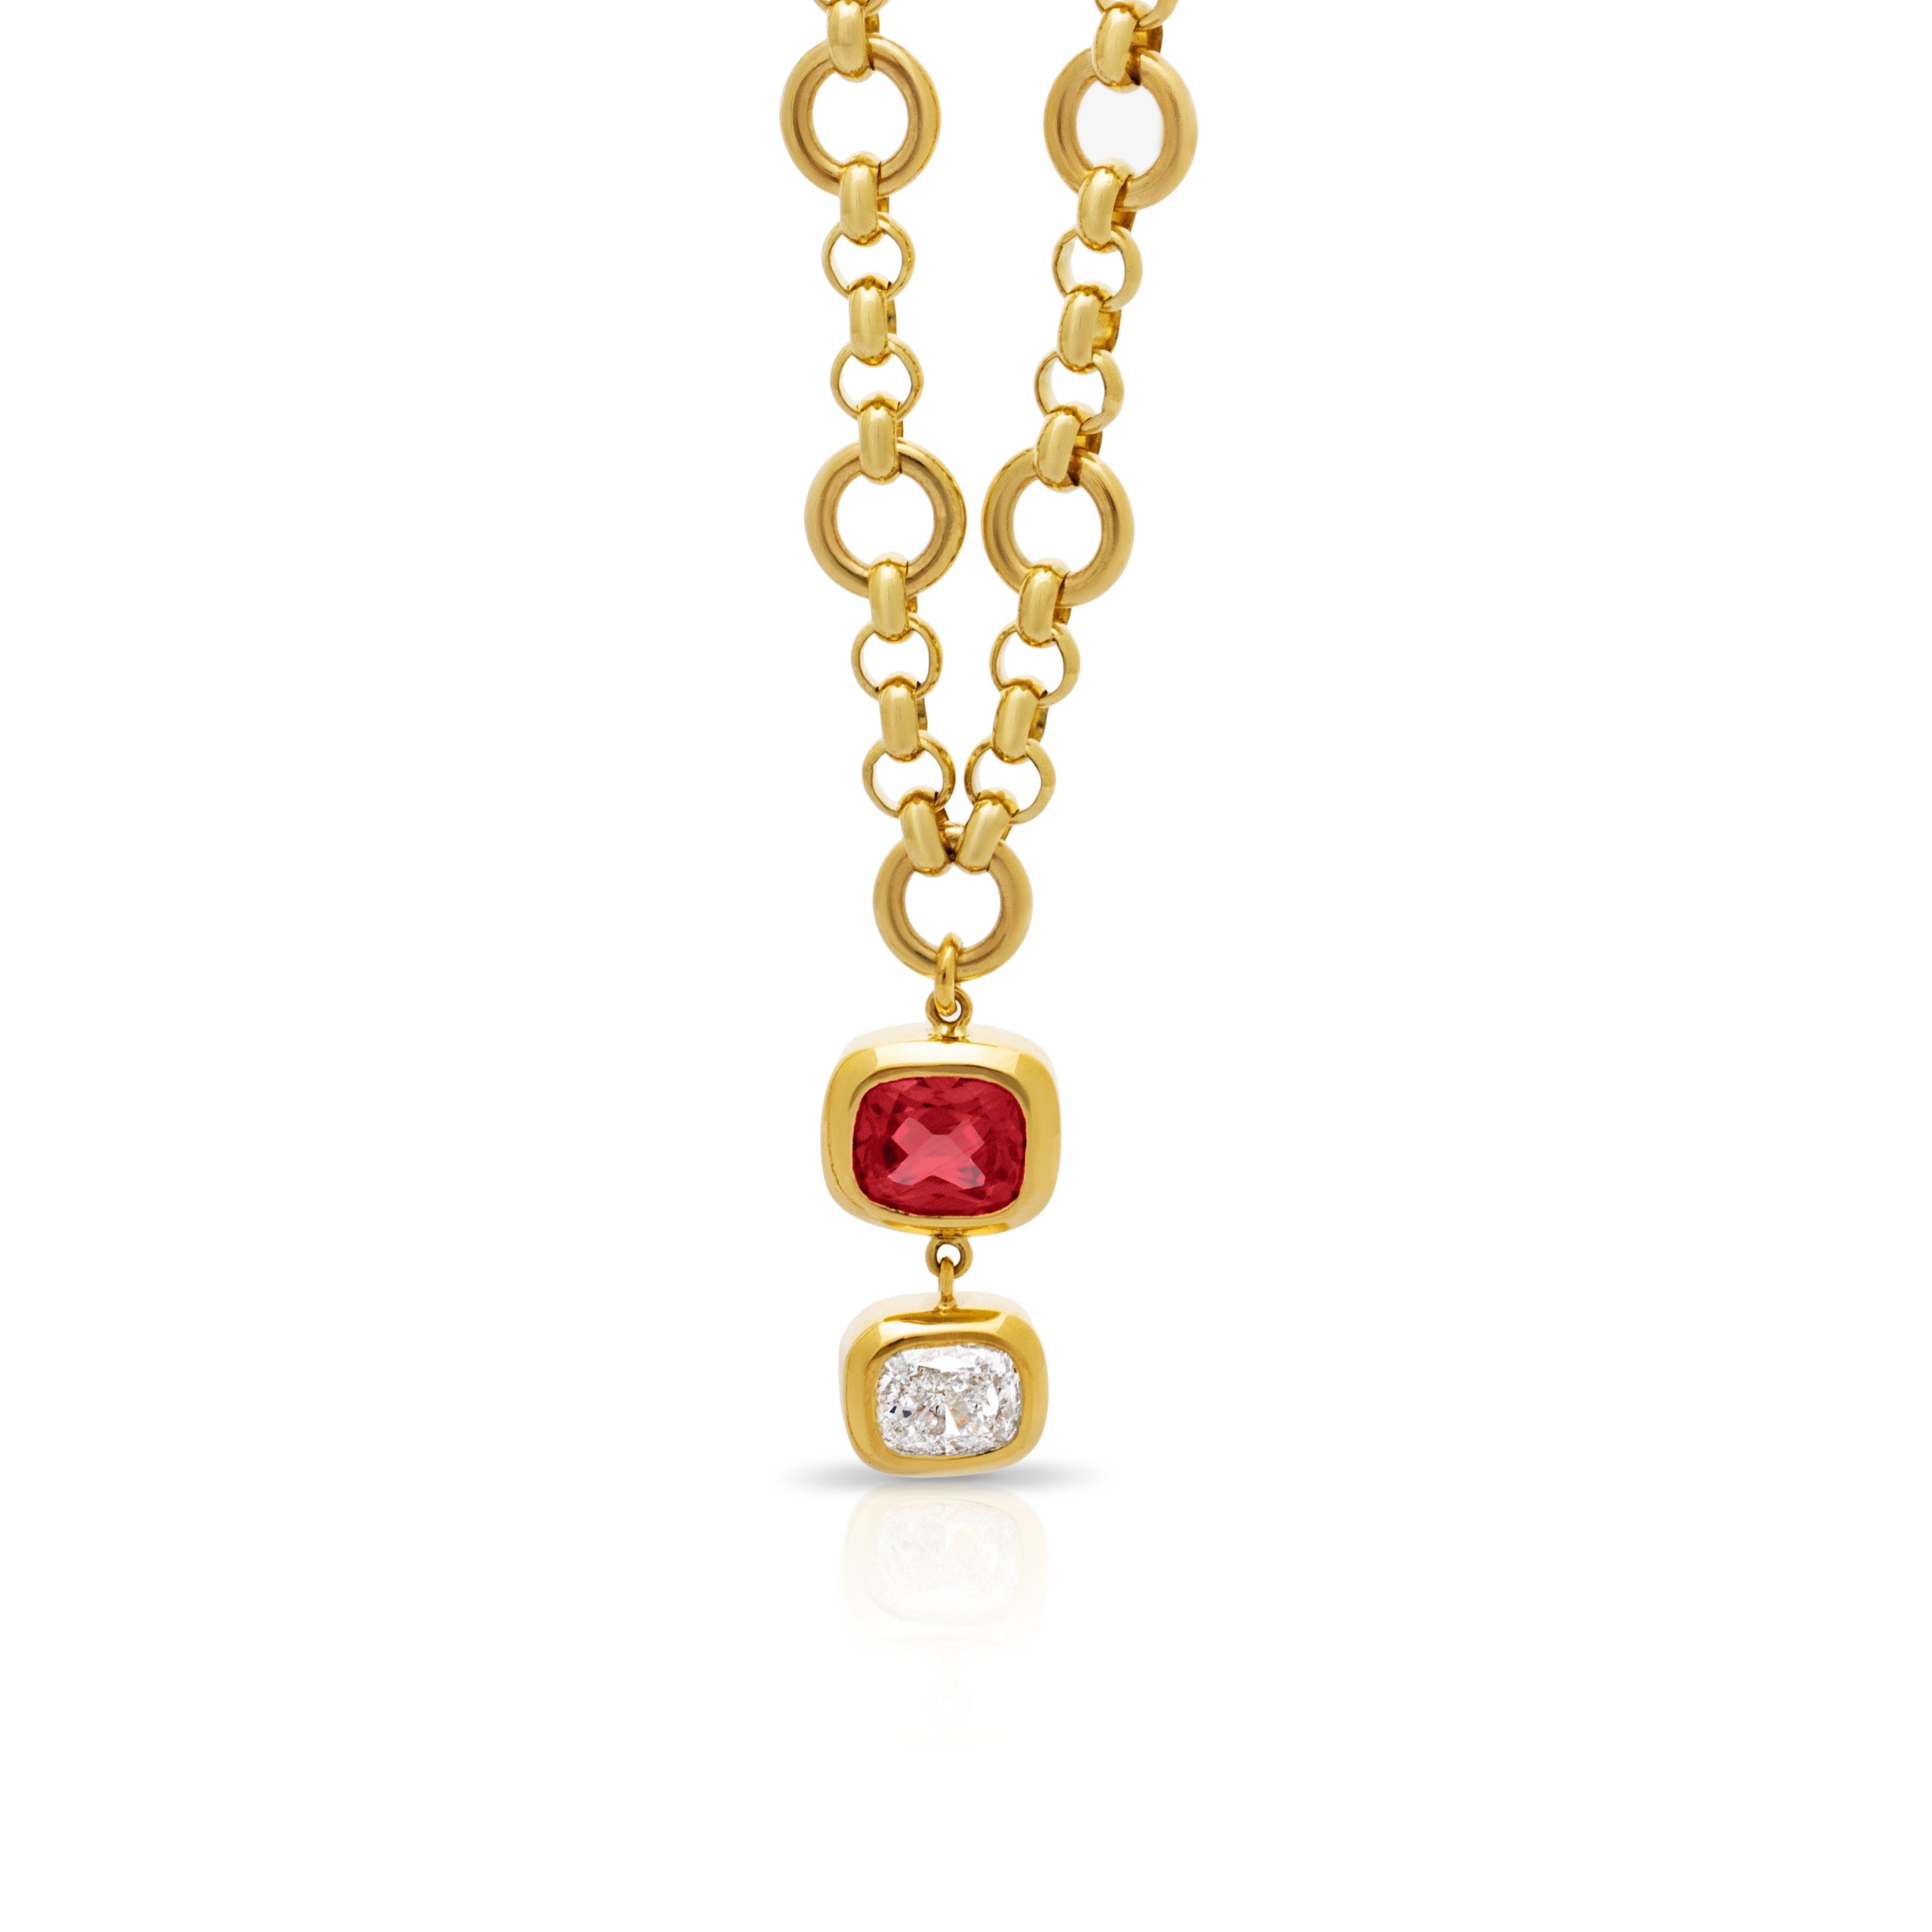 Red Spinel and Diamond pendant. Red Spinel and Diamond necklace. Natural red gemstone. Natural diamond necklace. Gemstone pendant. Gemstone necklace. 18 carat gold jewellery. Serena Ansell Jewellery. Fine jewellery London. 